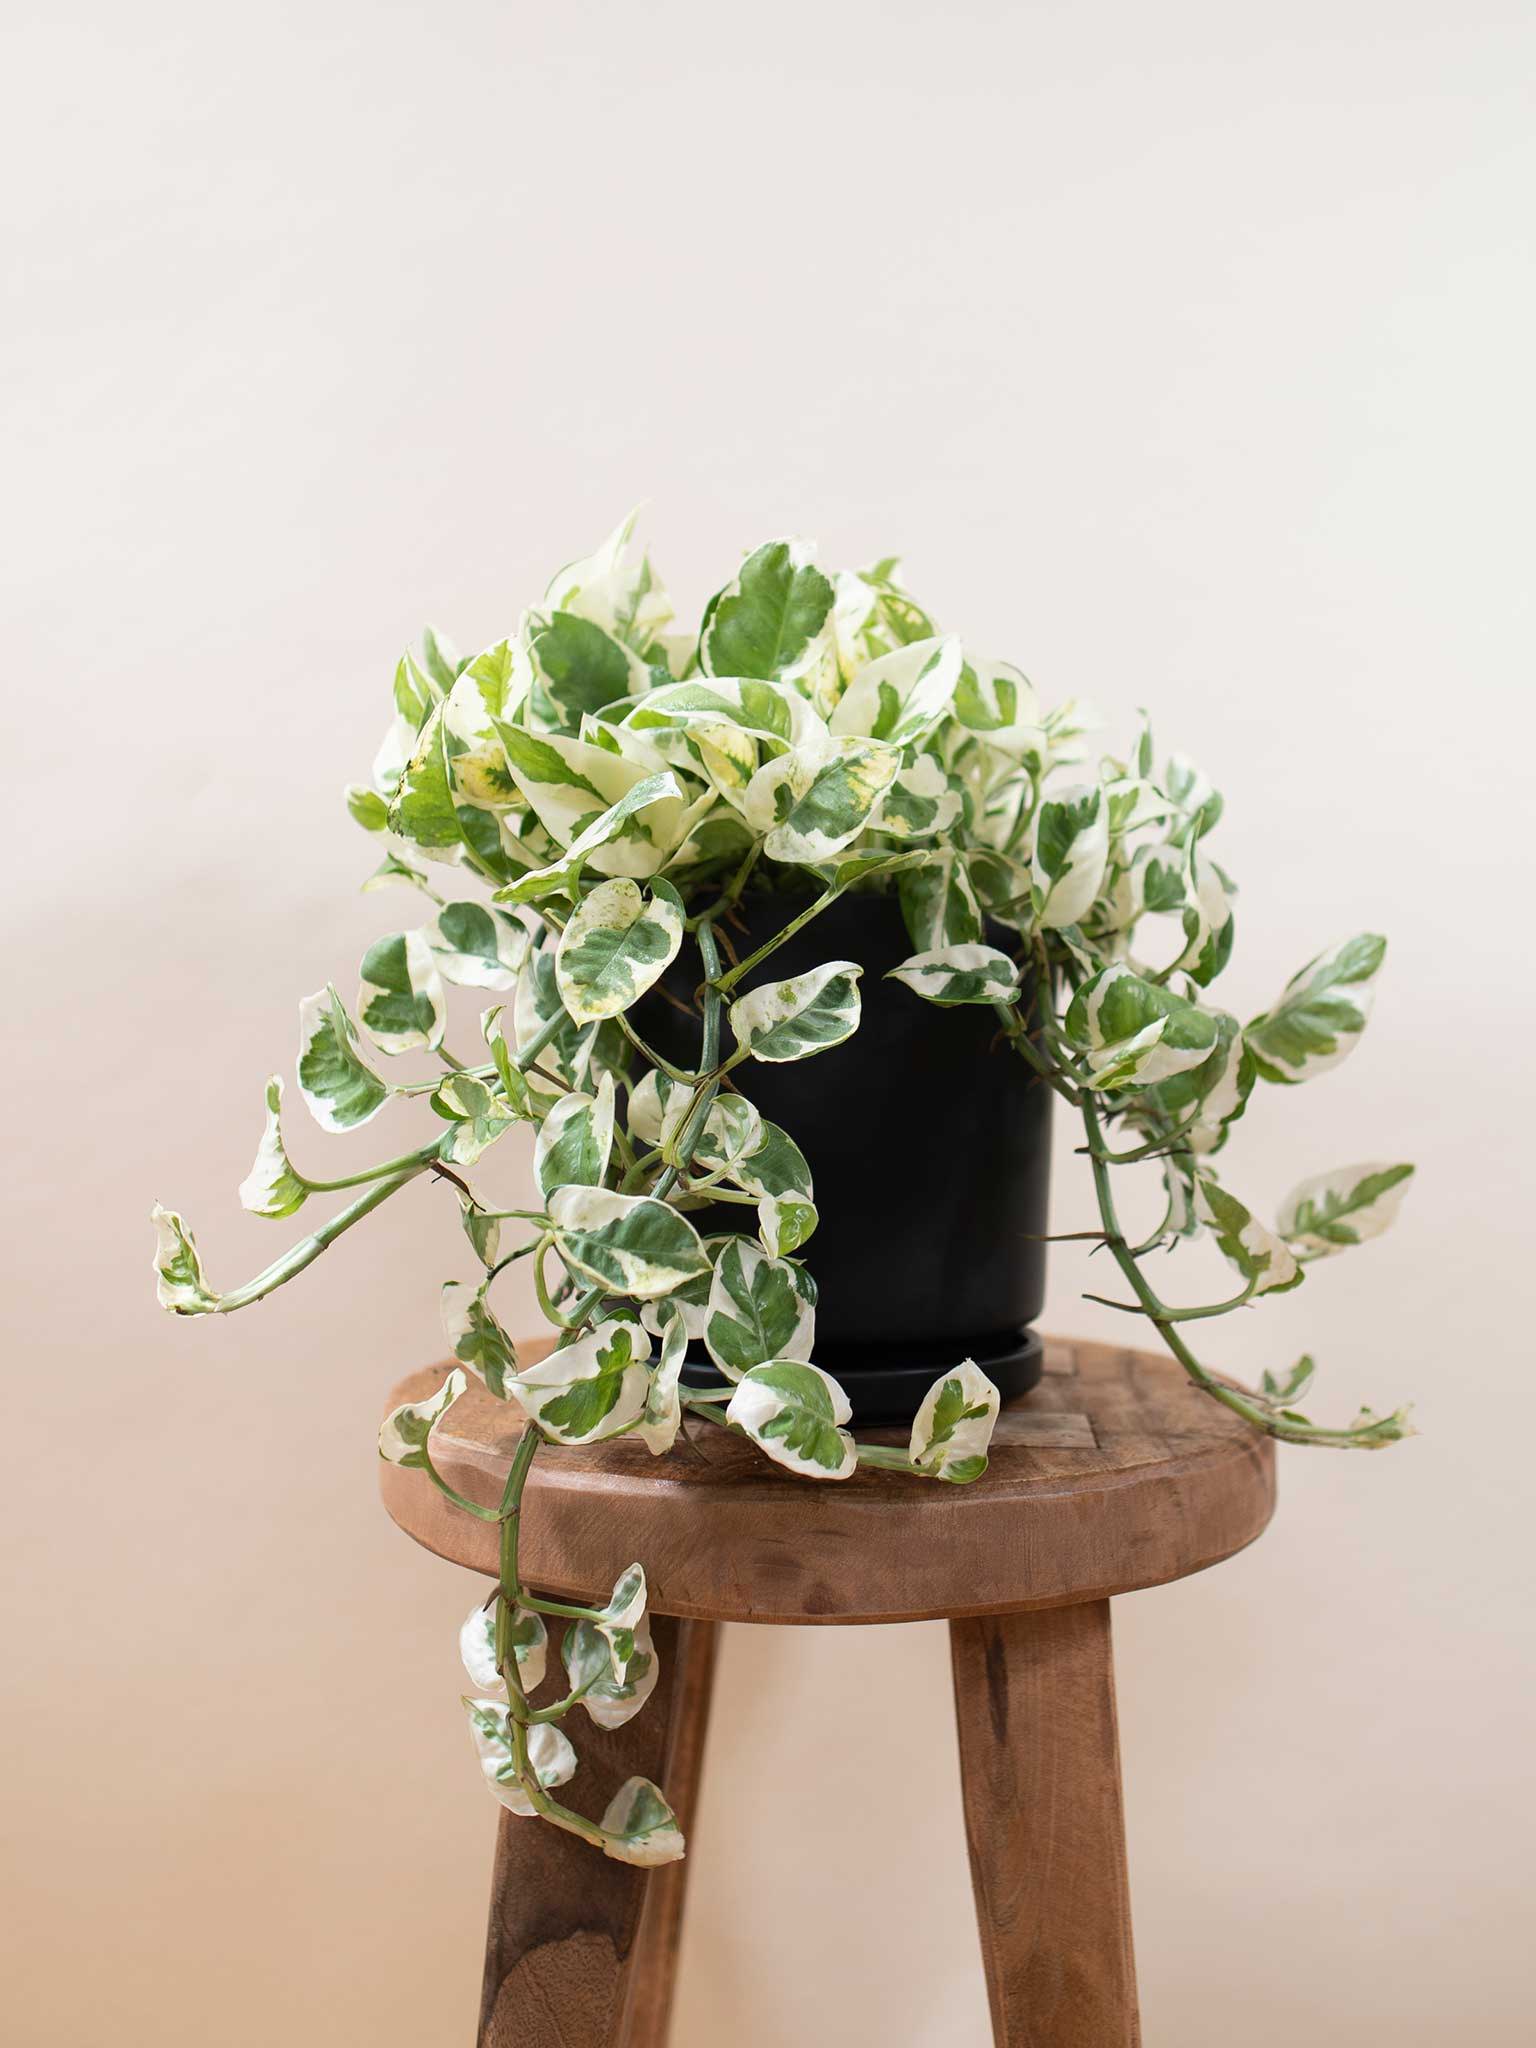 Pearls and jade pothos on a stool